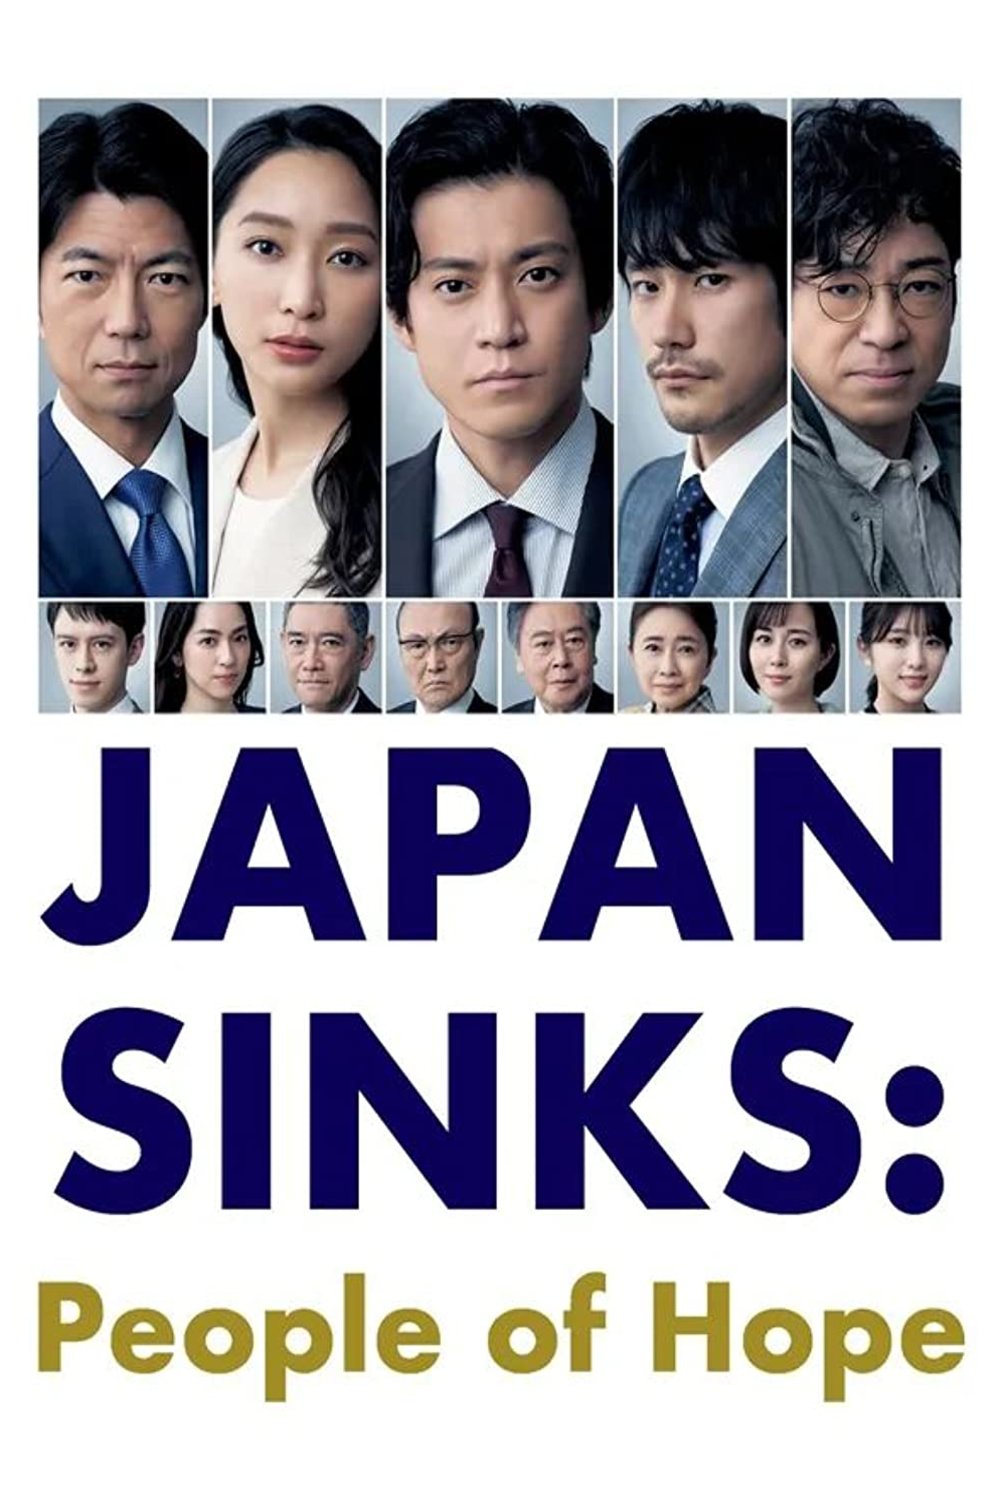 Japanese poster of the movie Japan Sinks: People of Hope